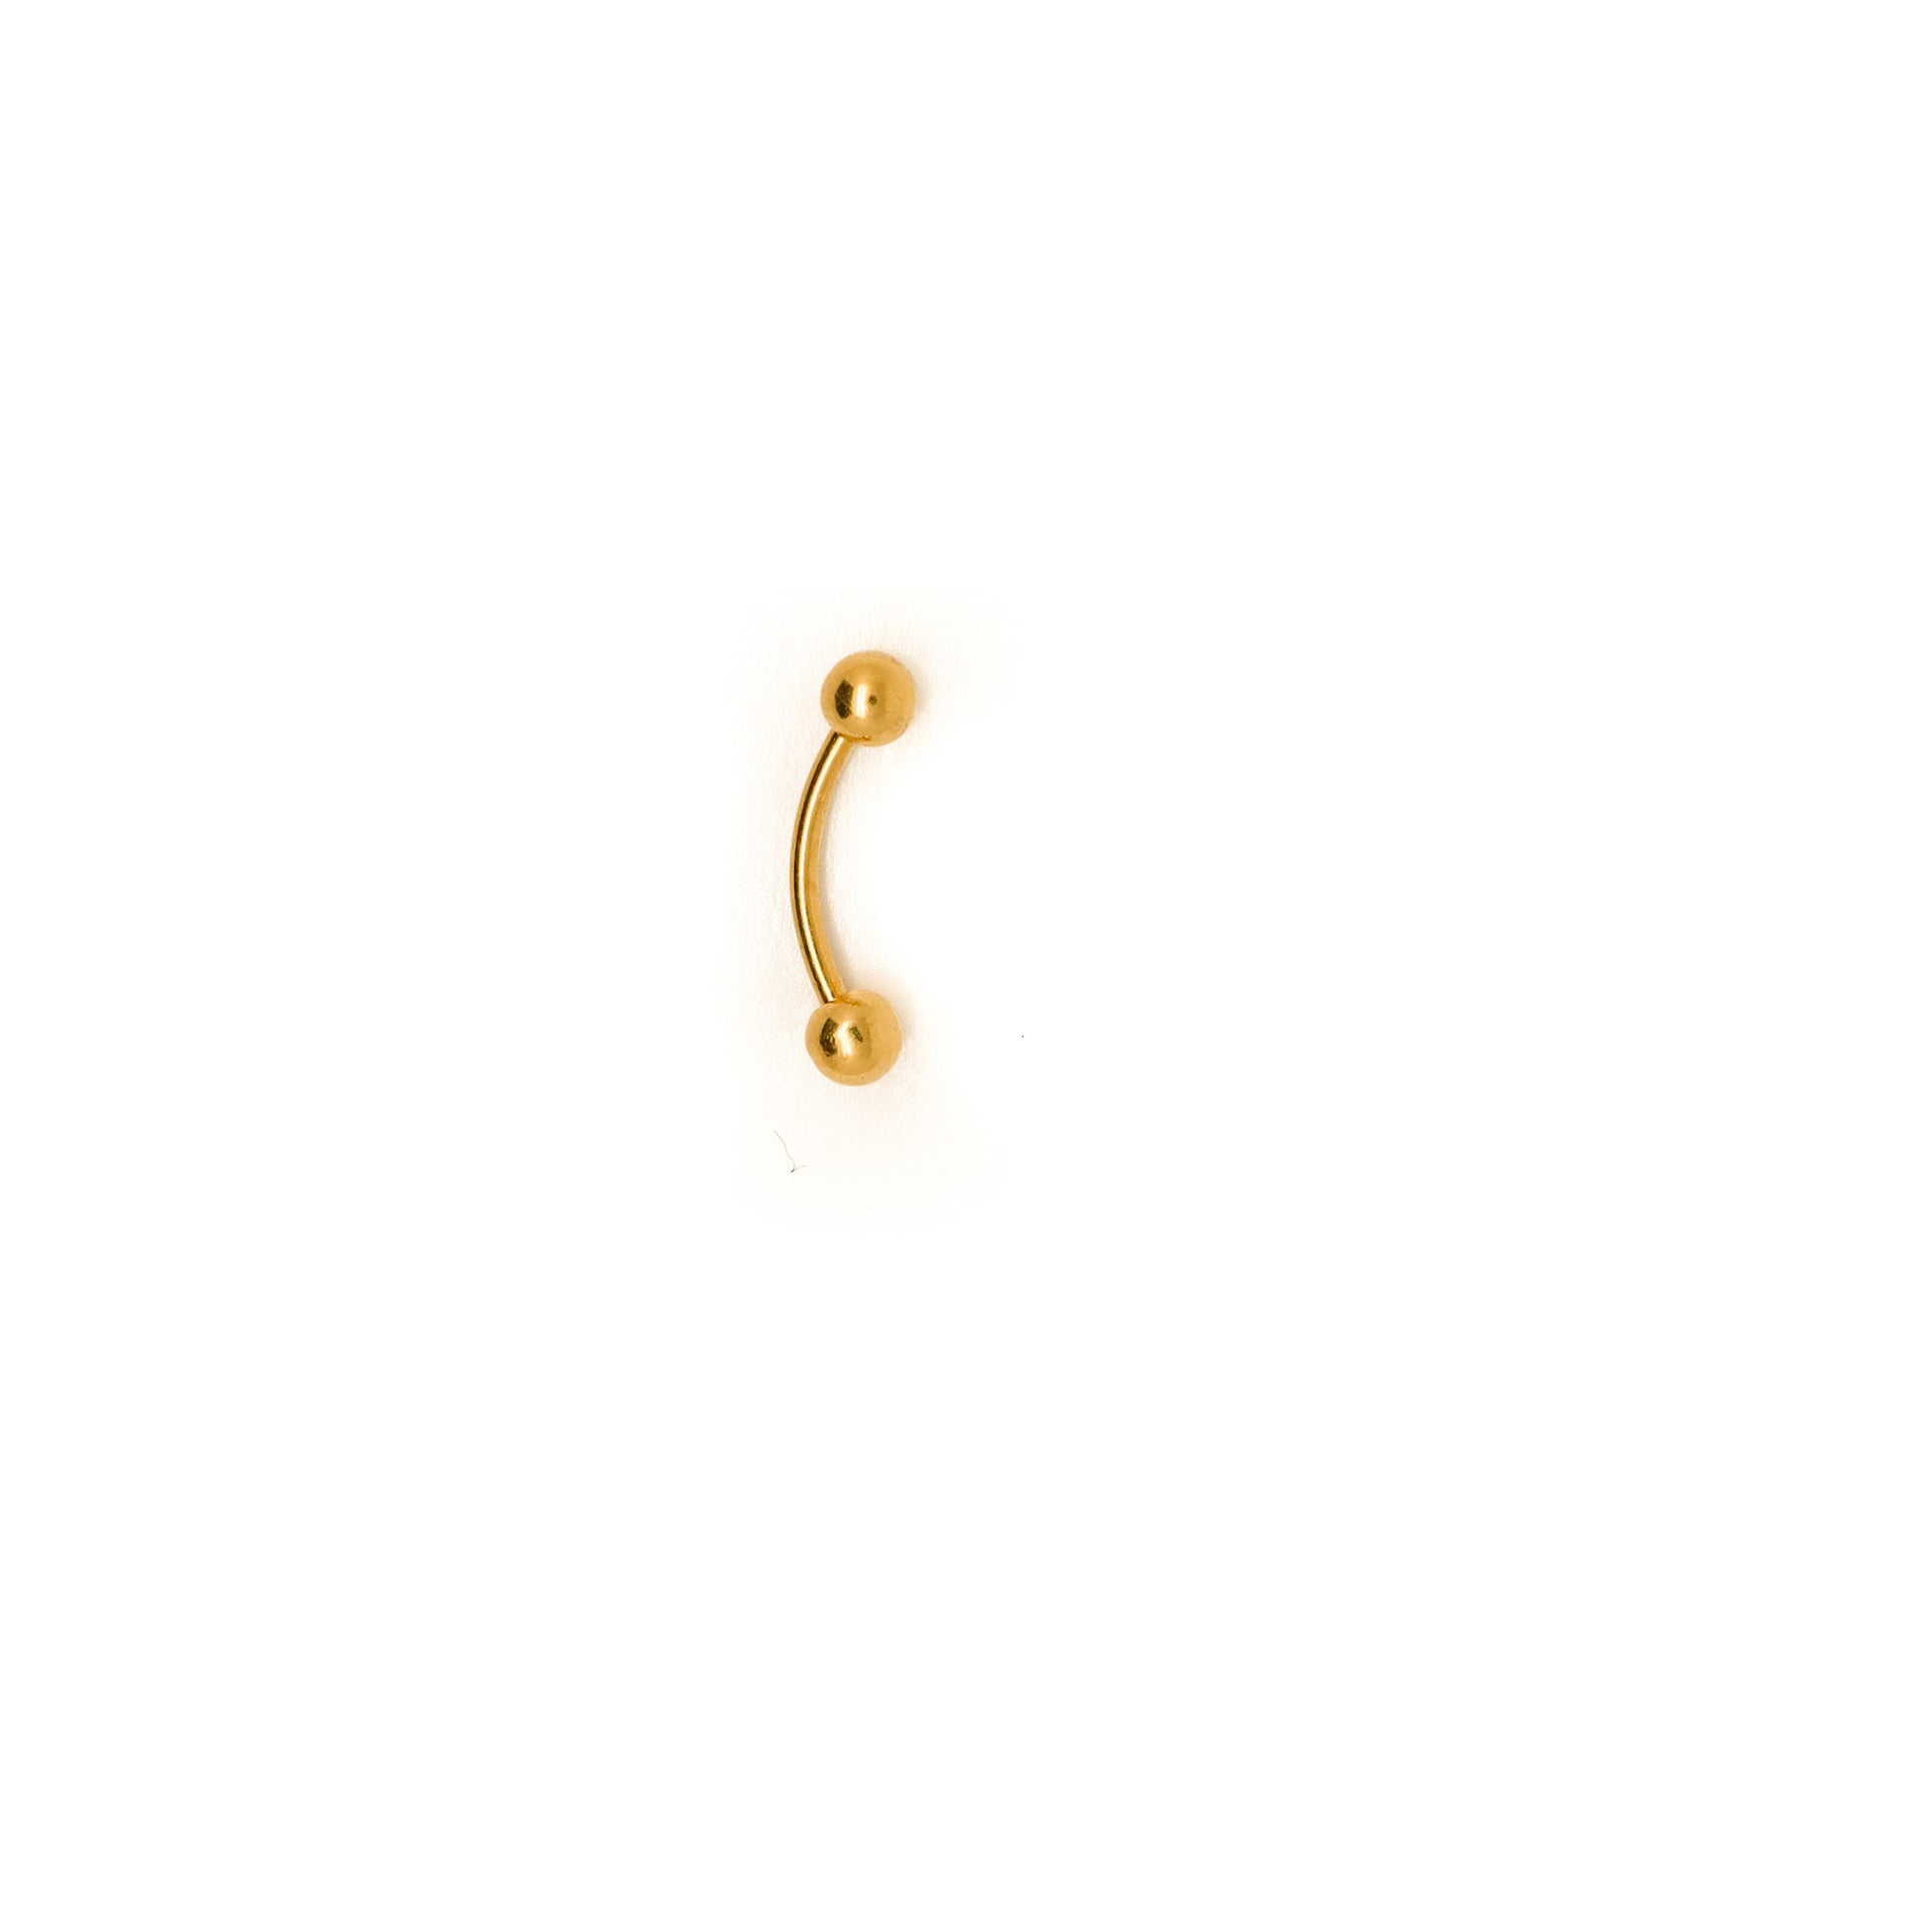 24K Gold Vermeil | 925 Silver 24k Gold Coated 20G Curved Barbell Rook Piercing | Snug | Eyebrow | Cartilage | 5mm 7mm - Sturdy South